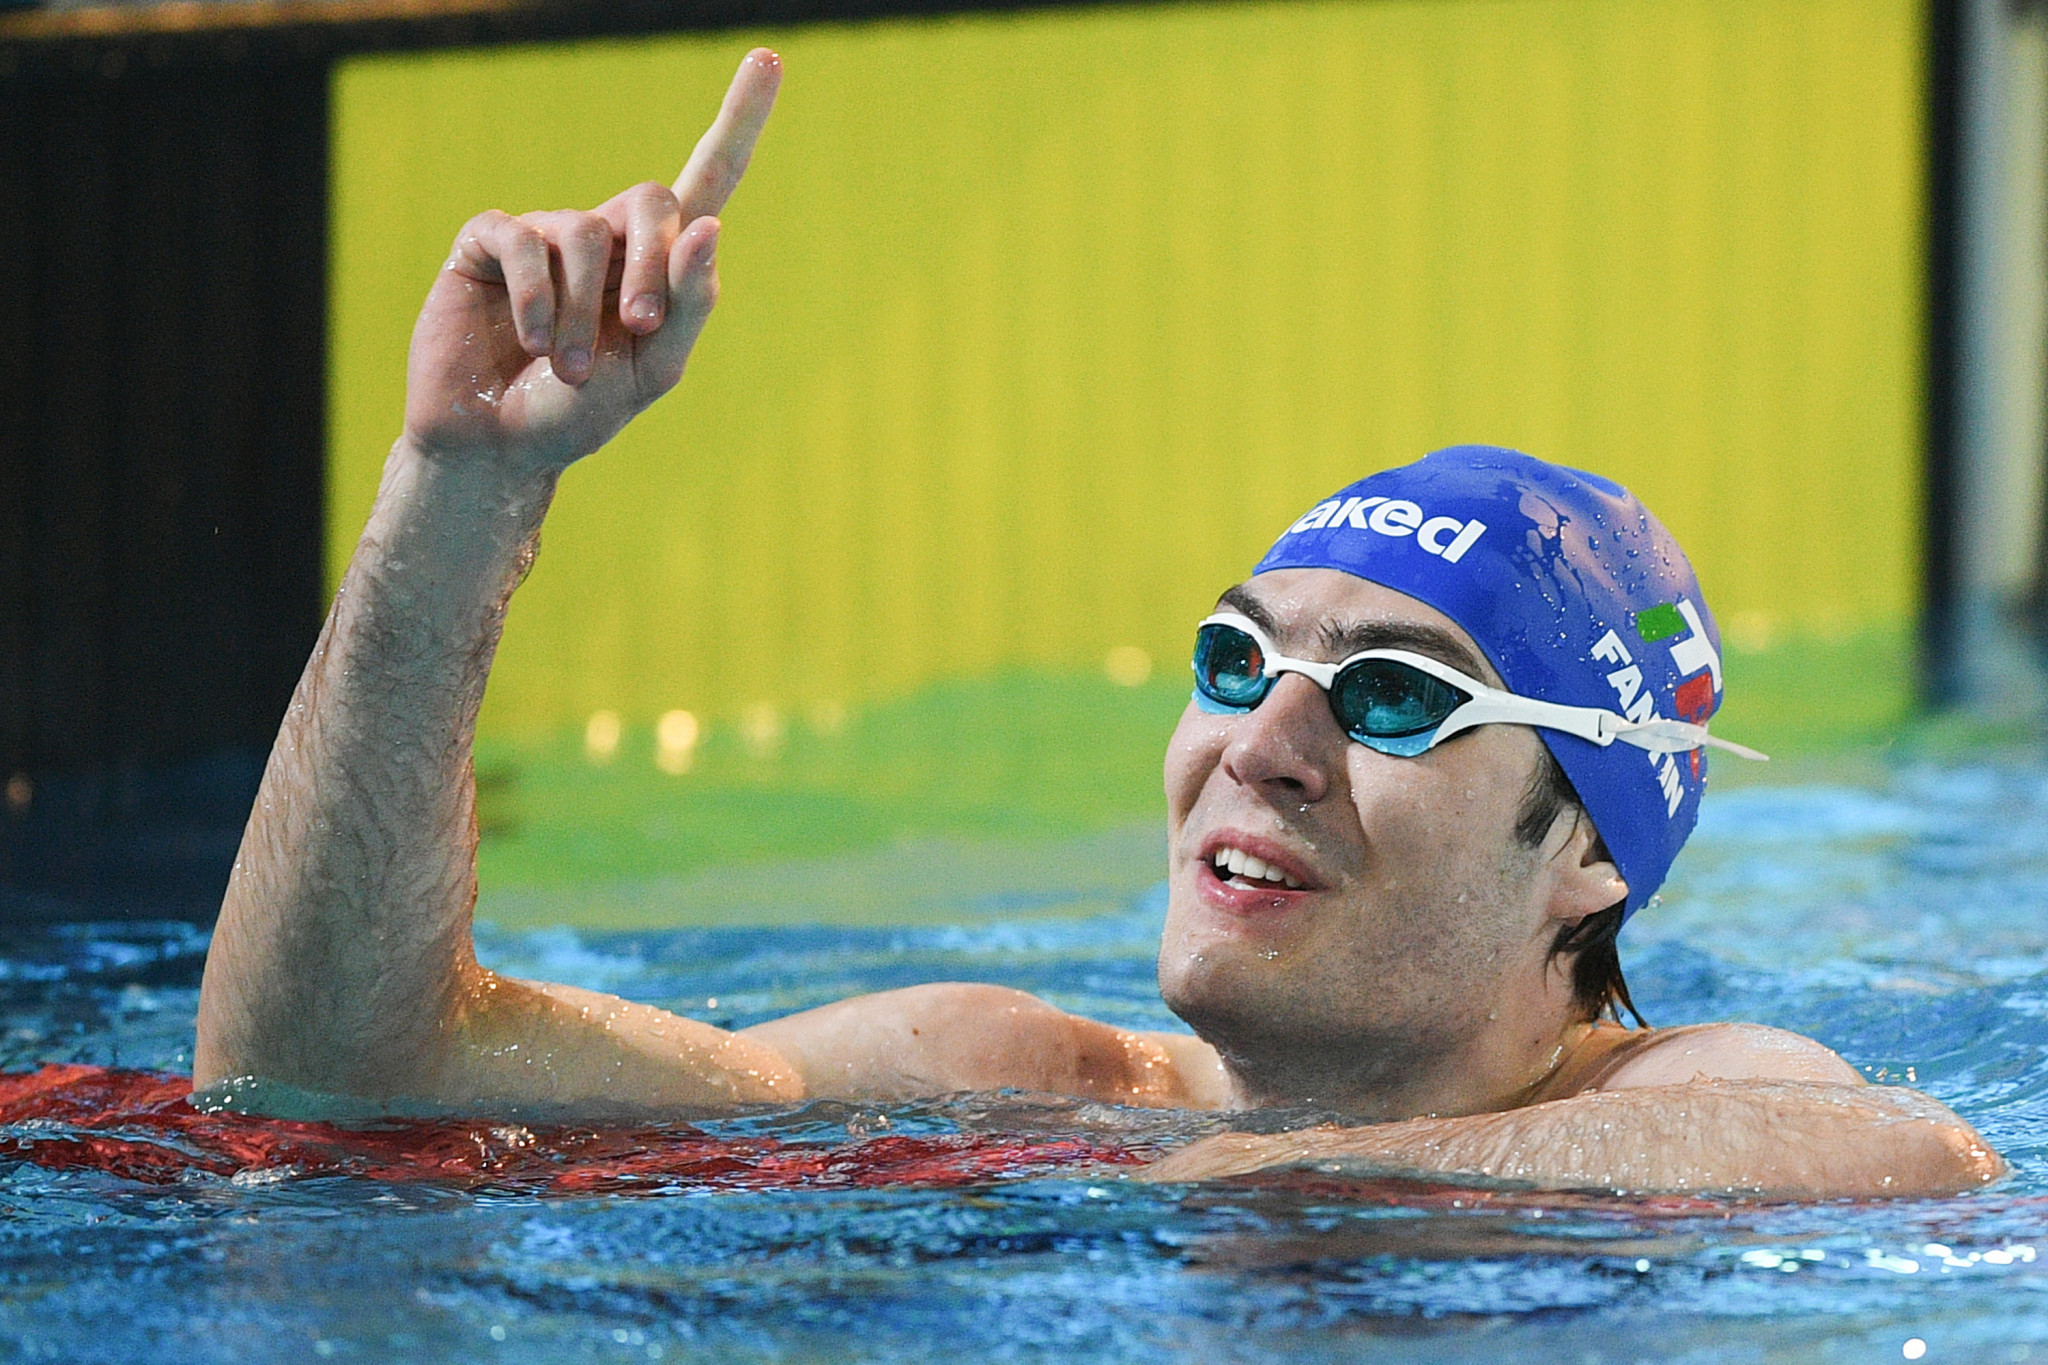 Antonio Fantin set a Championships record in the men's S6 50m freestyle to help move Italy top of the medals table ©Getty Images